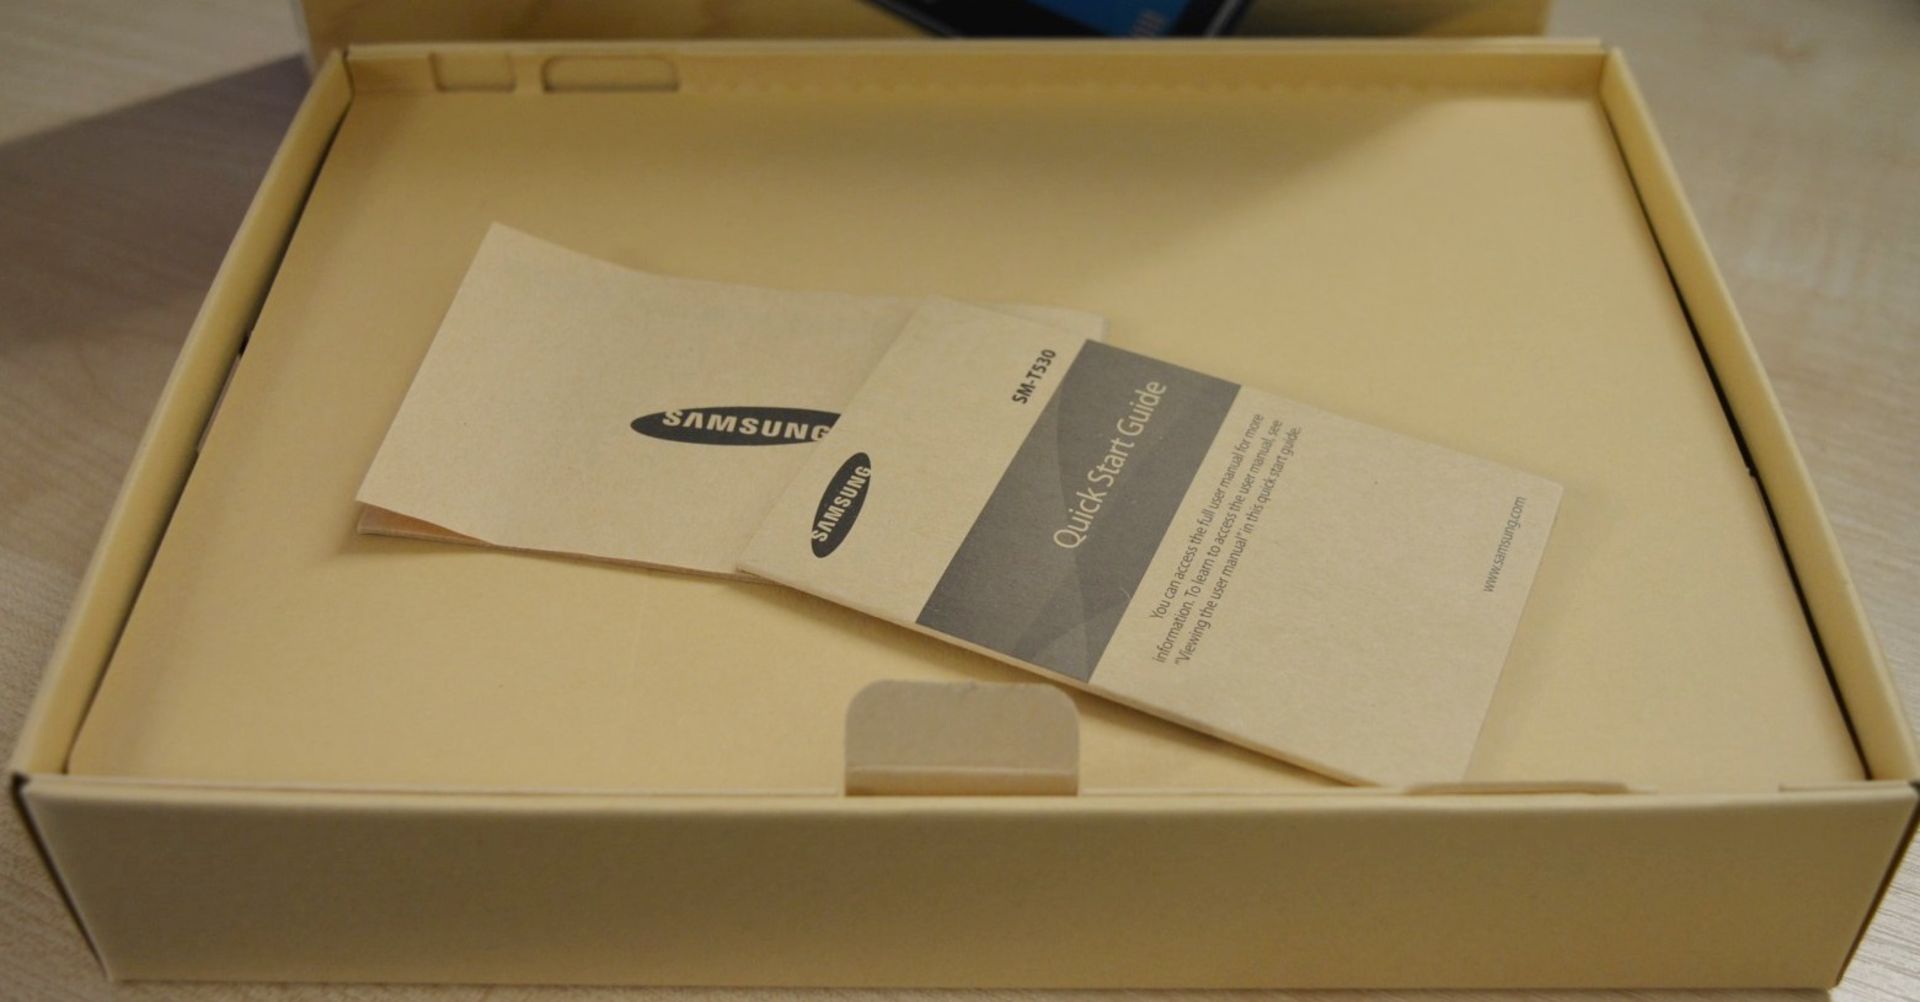 7 x Empty Samsung Galaxy Tab4 Table Retail Boxes - CL300 - Ref CAT113 - Empty Boxes May Have Some In - Image 4 of 6